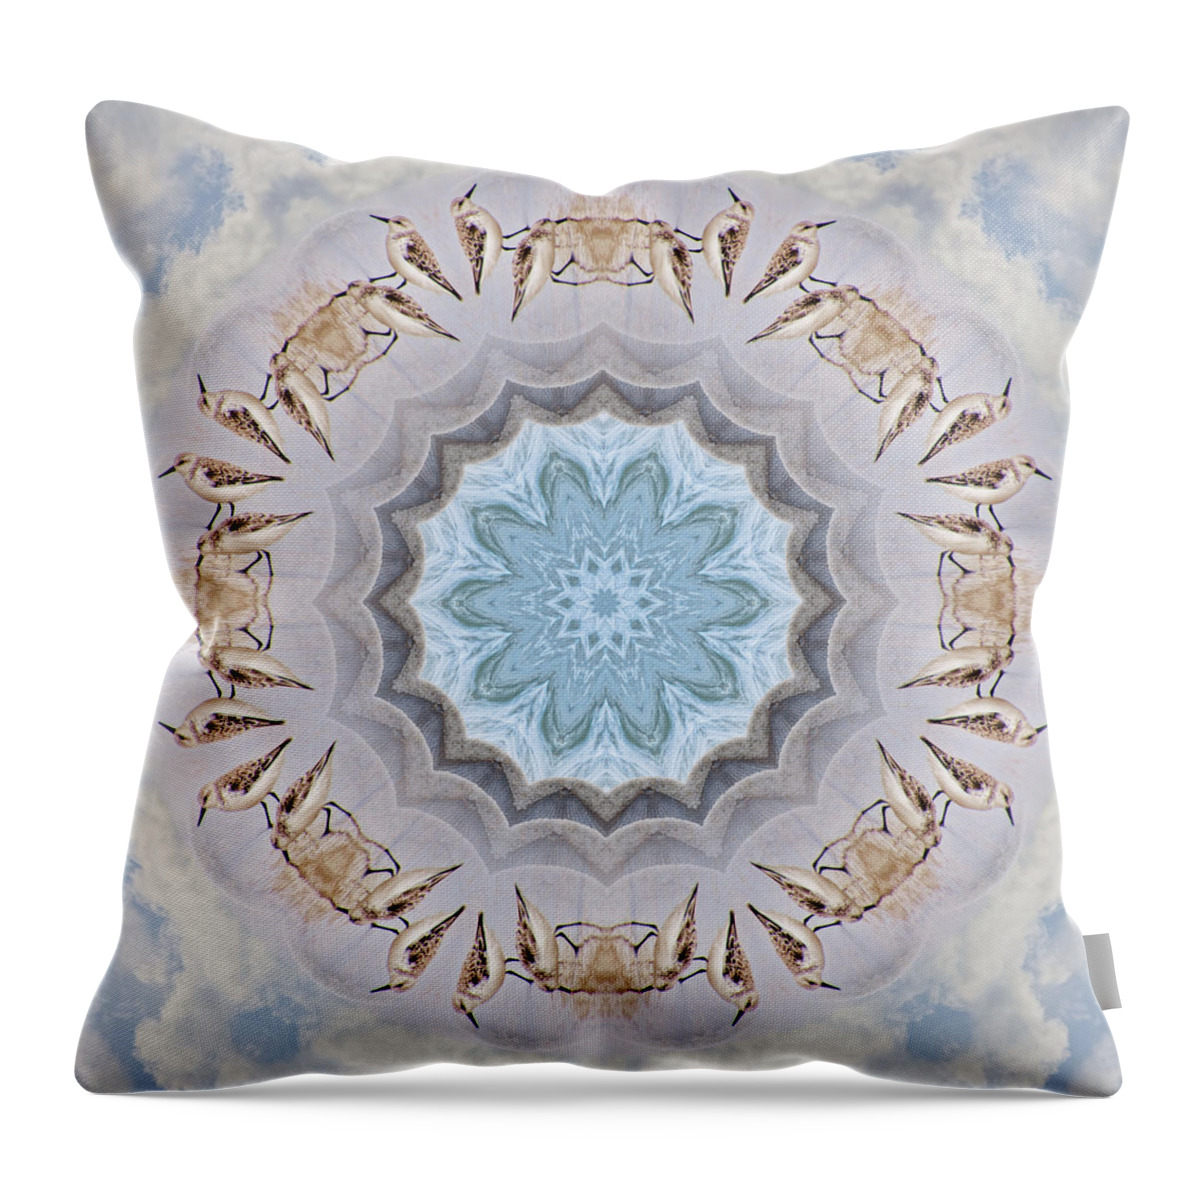 Sand Piper Throw Pillow featuring the photograph Sandpiper Mandala by Beth Venner